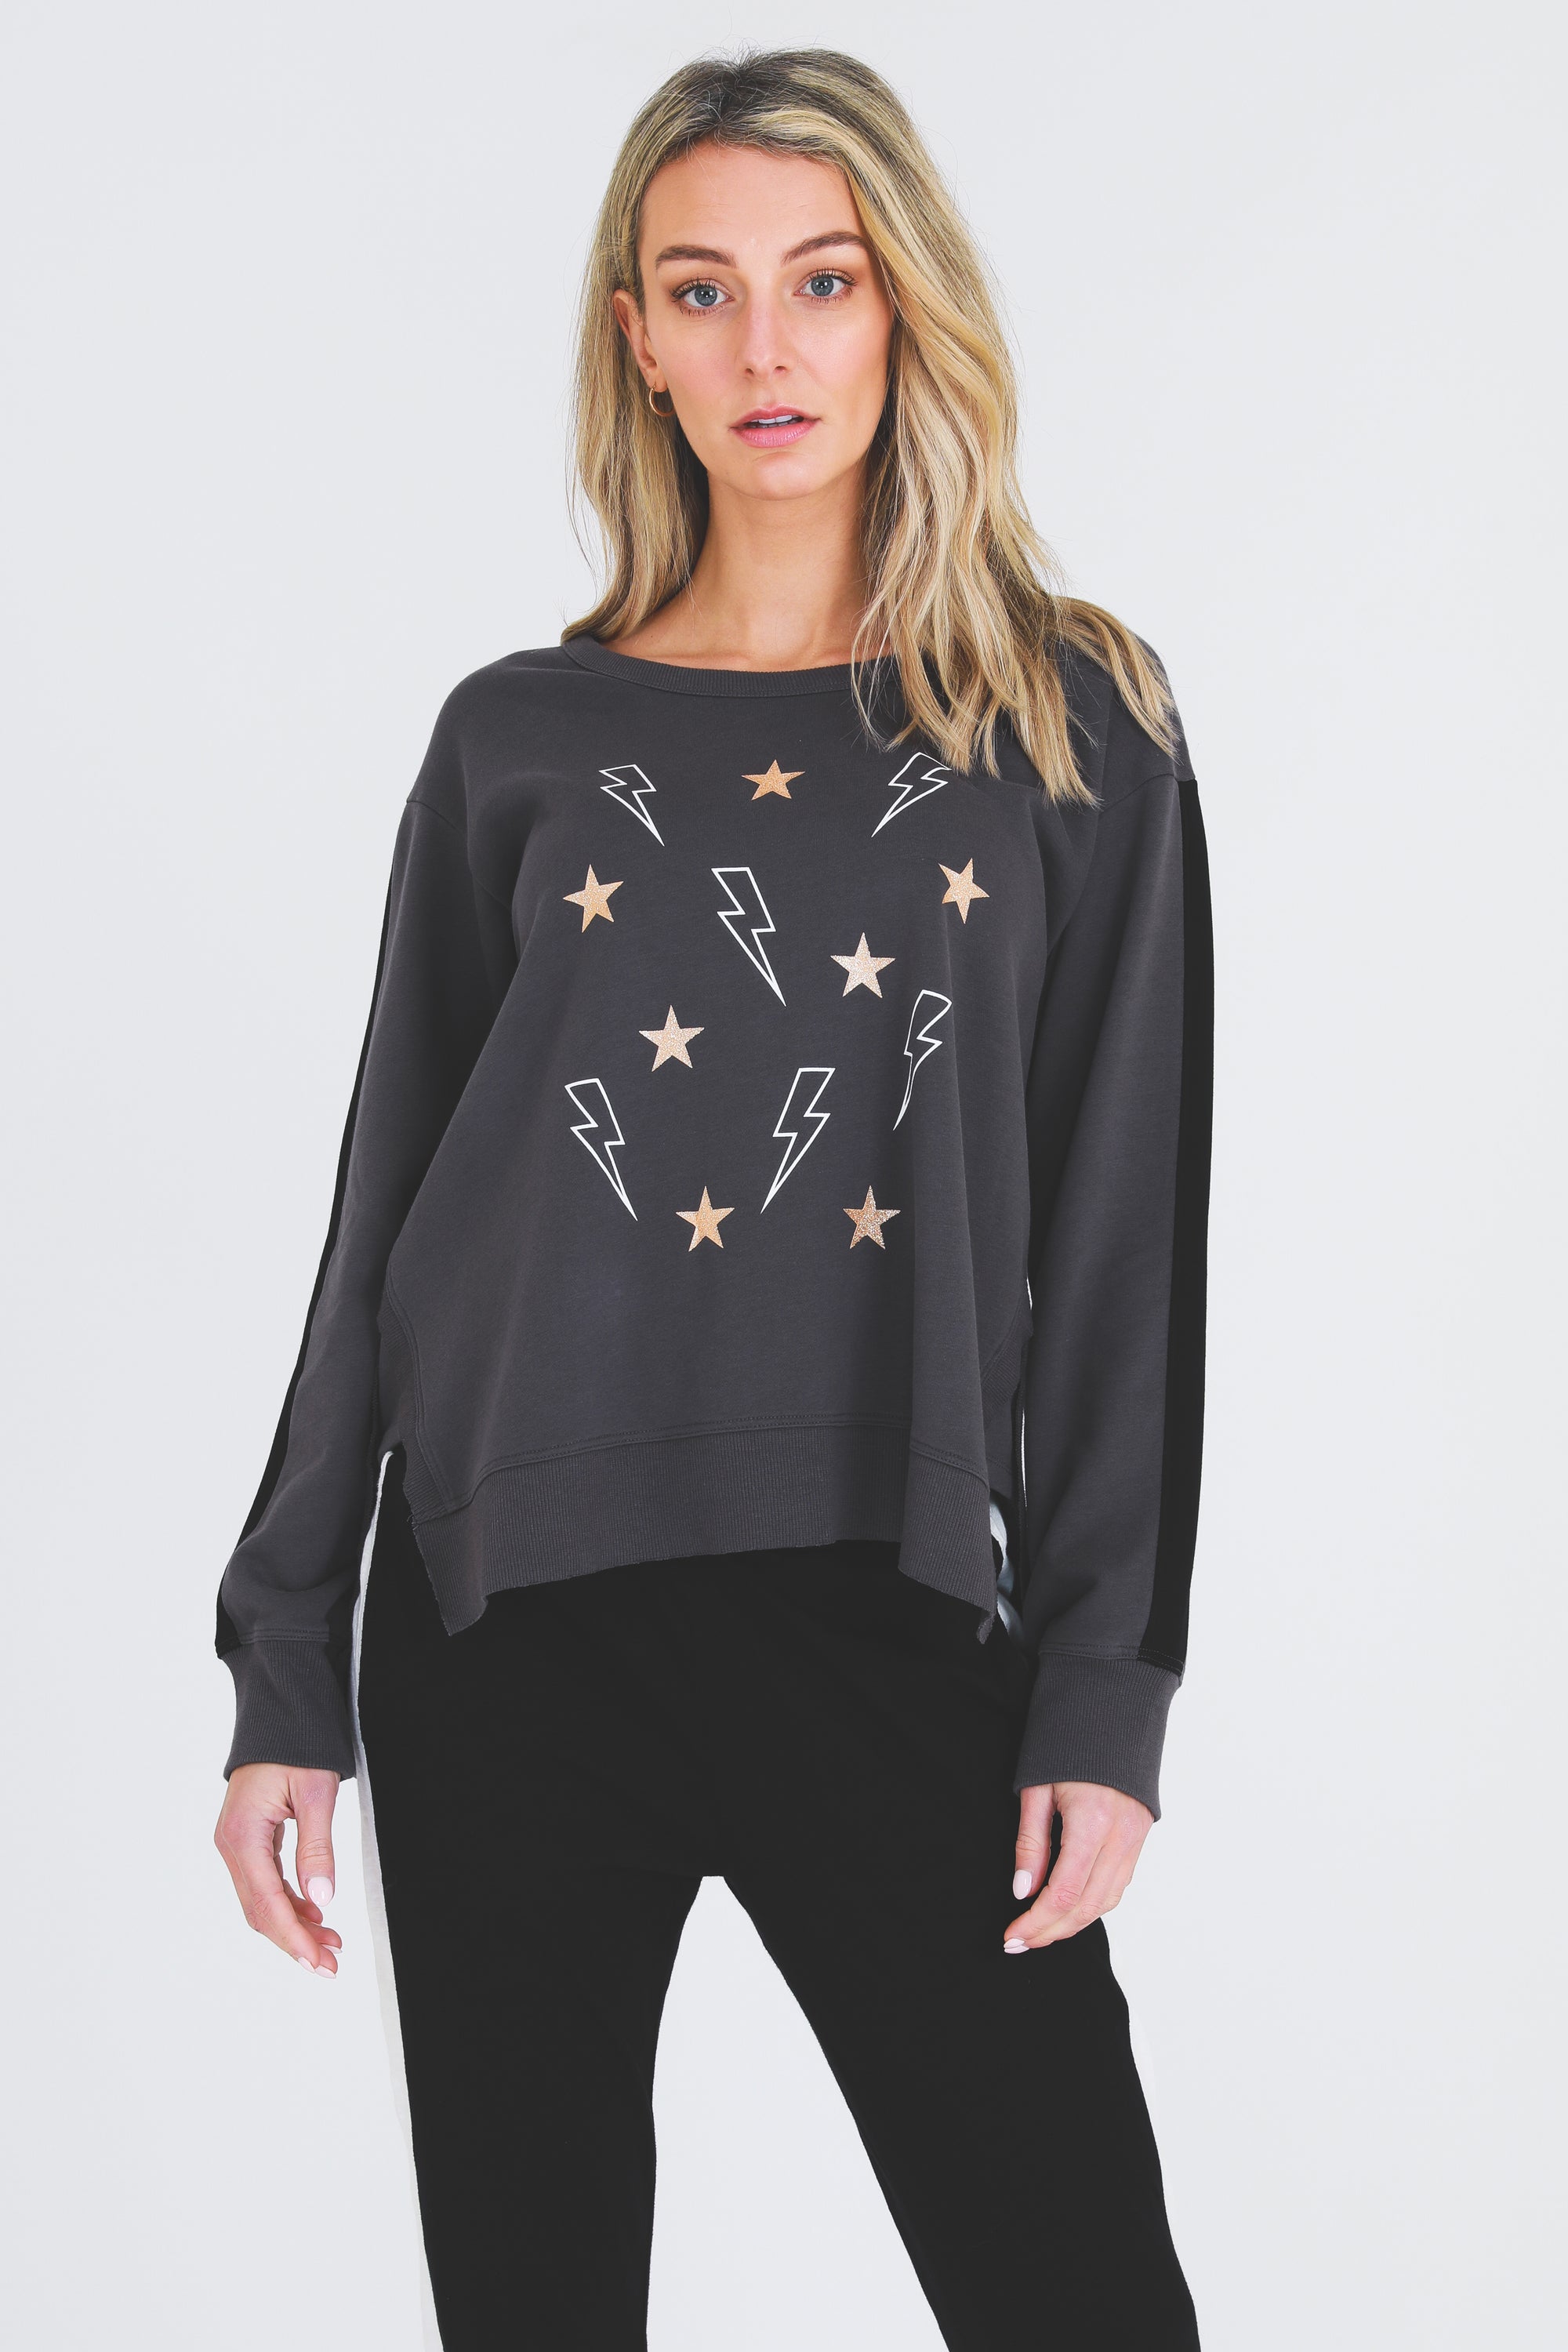 Mini Star with Bolts Sweater - Charcoal